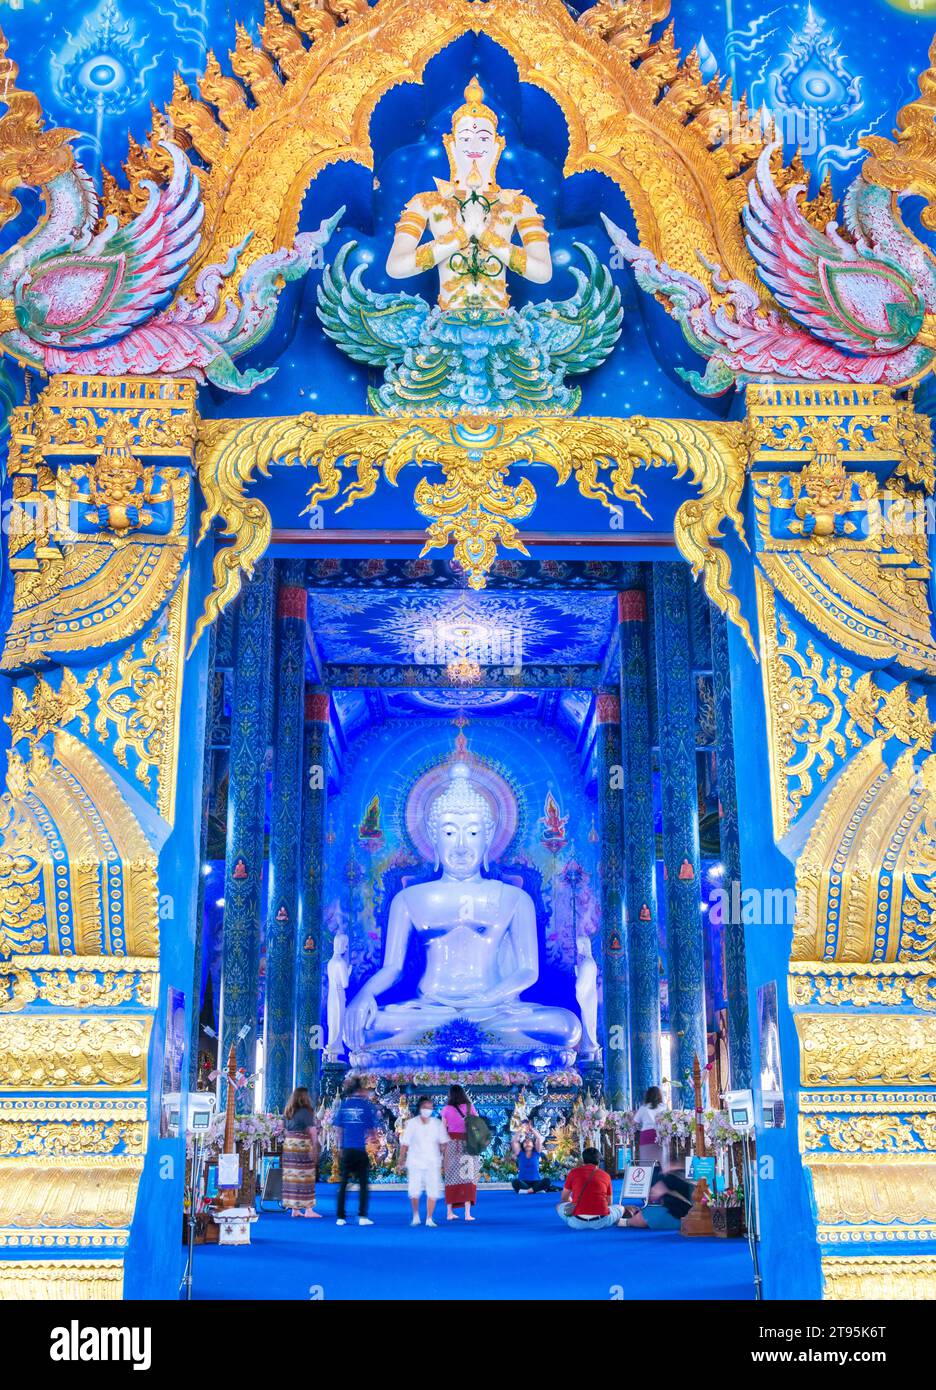 Chiang Rai,NorthThailand-March 26 2023:The ornate golden door frame of The Blue Temple,leads into the interior,decorated with intricate designs,blue h Stock Photo